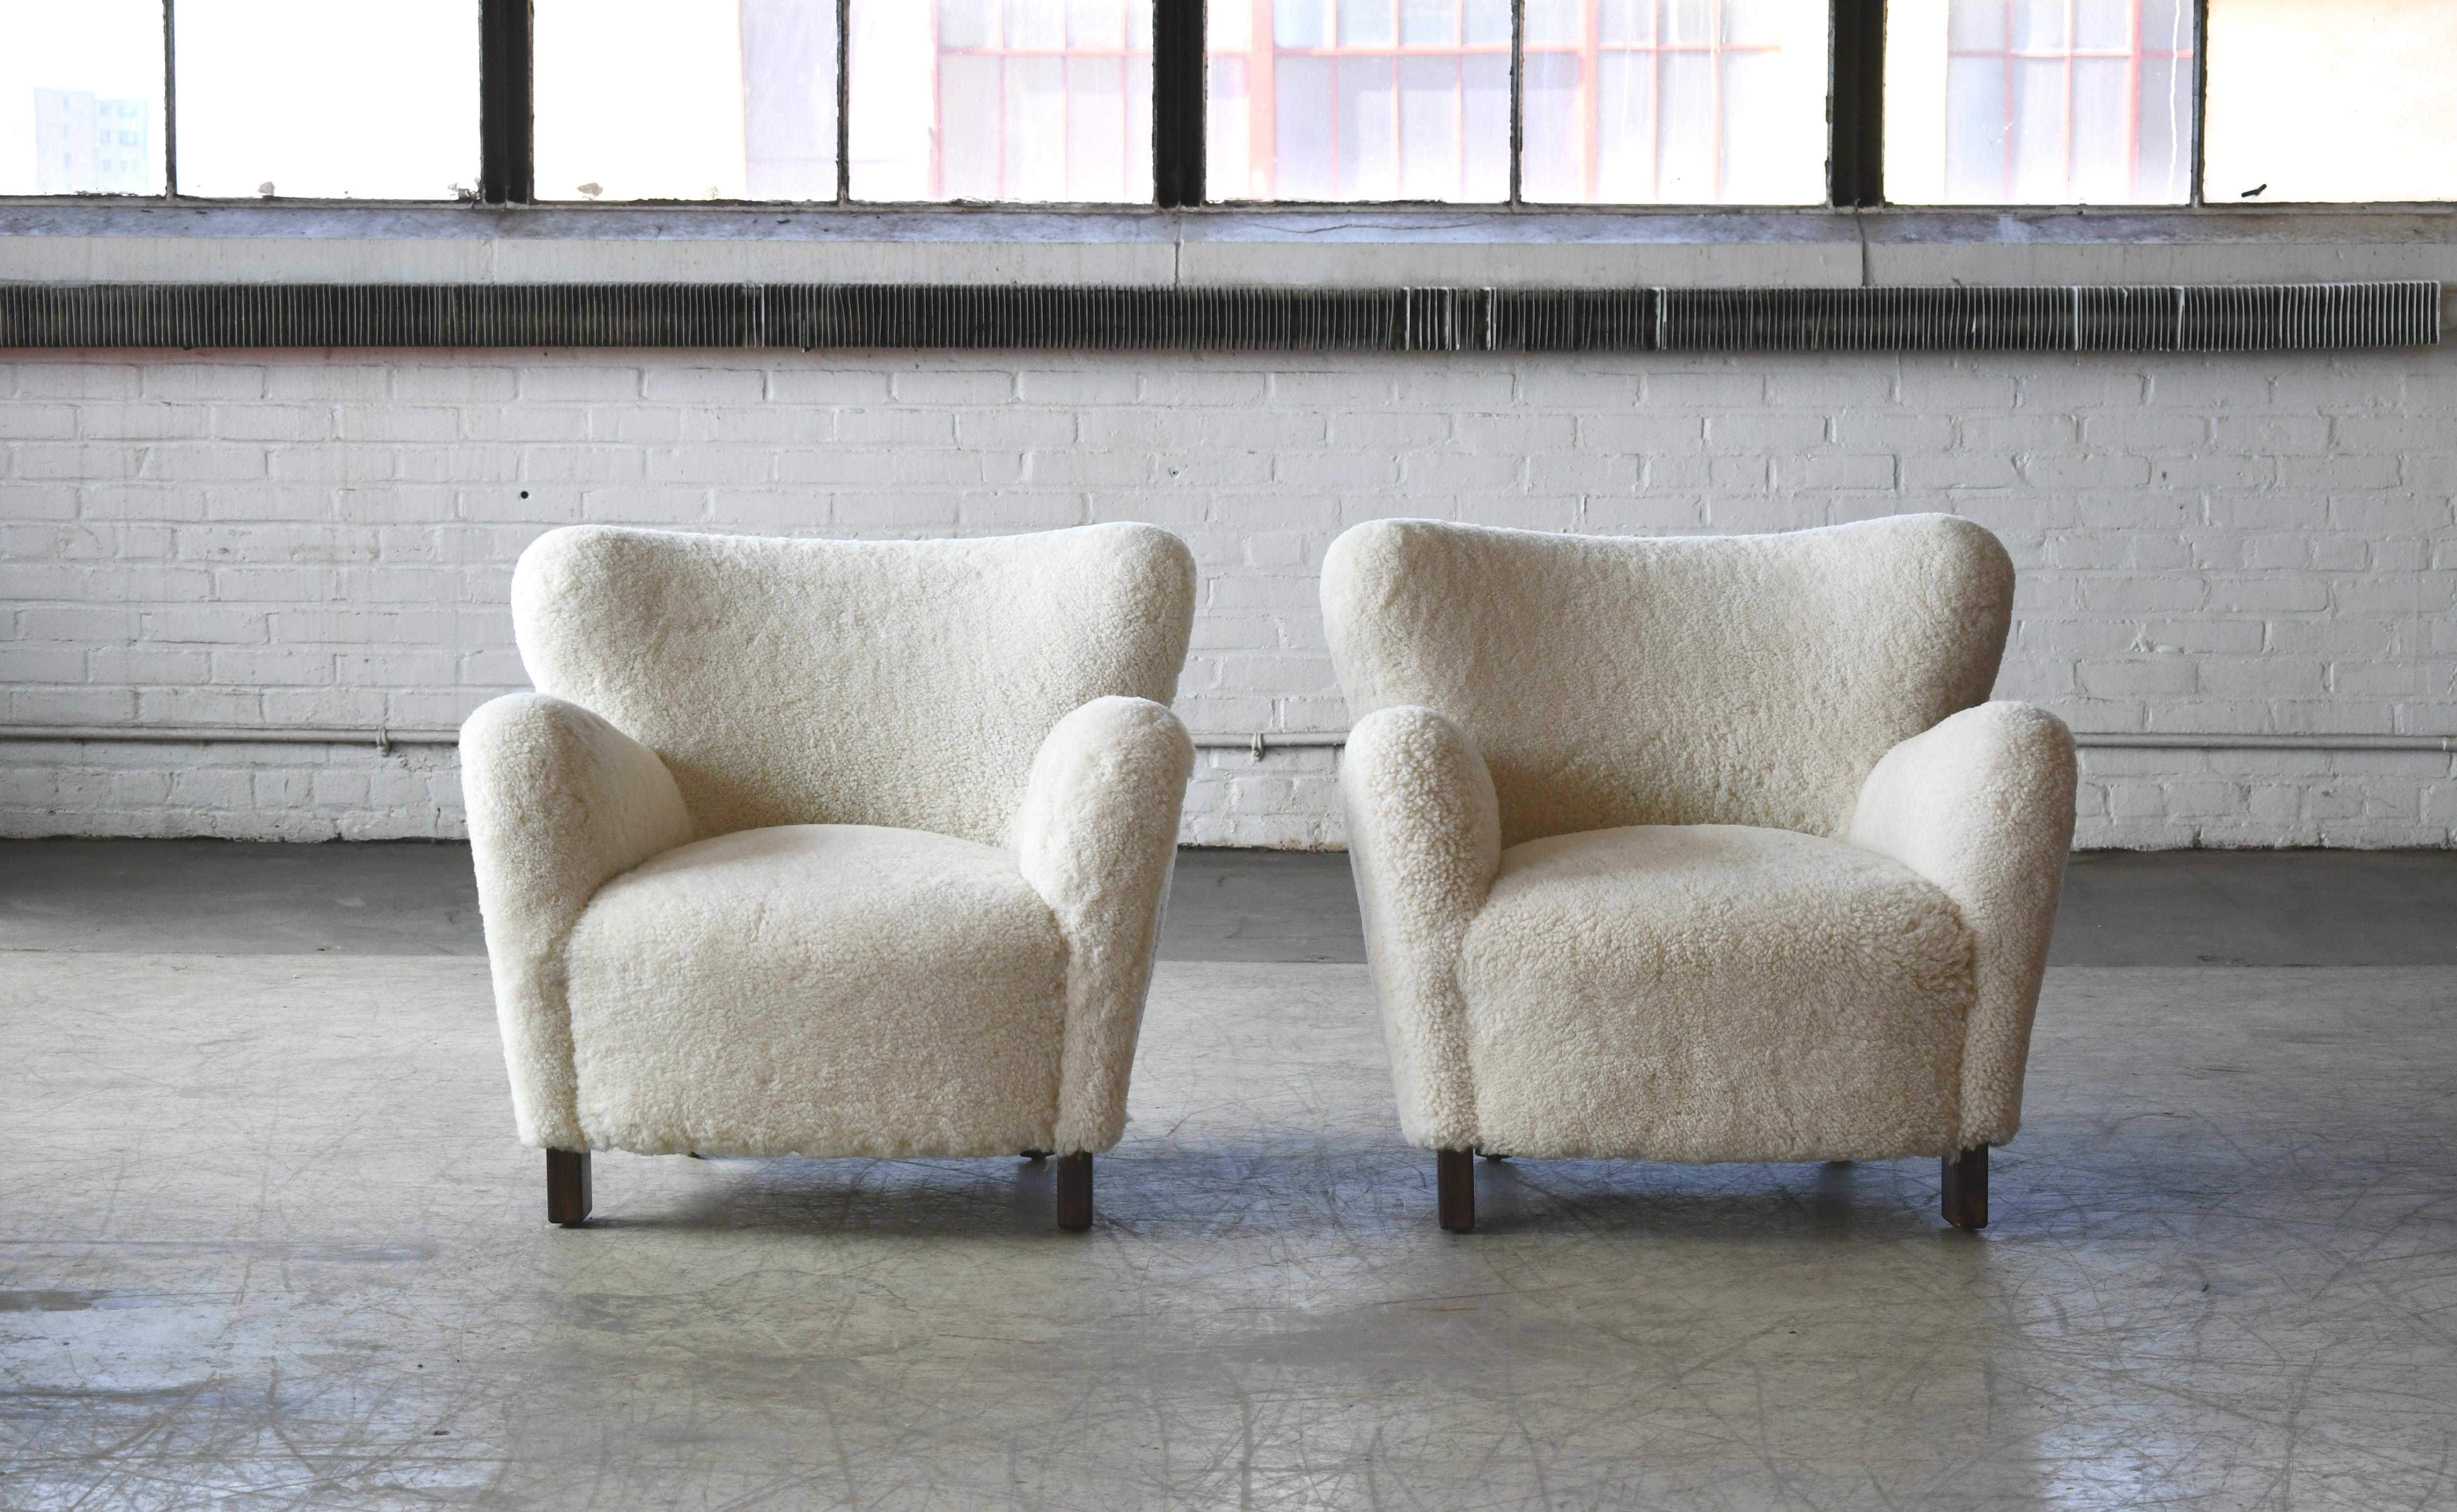 Beautiful exuberant pair of new Danish modern lounge chairs of our own design. The design is inspired by the Classic designs from the 1940s but with our own design variations and up-dated dimensions. The chairs are based on a hand-built frame built